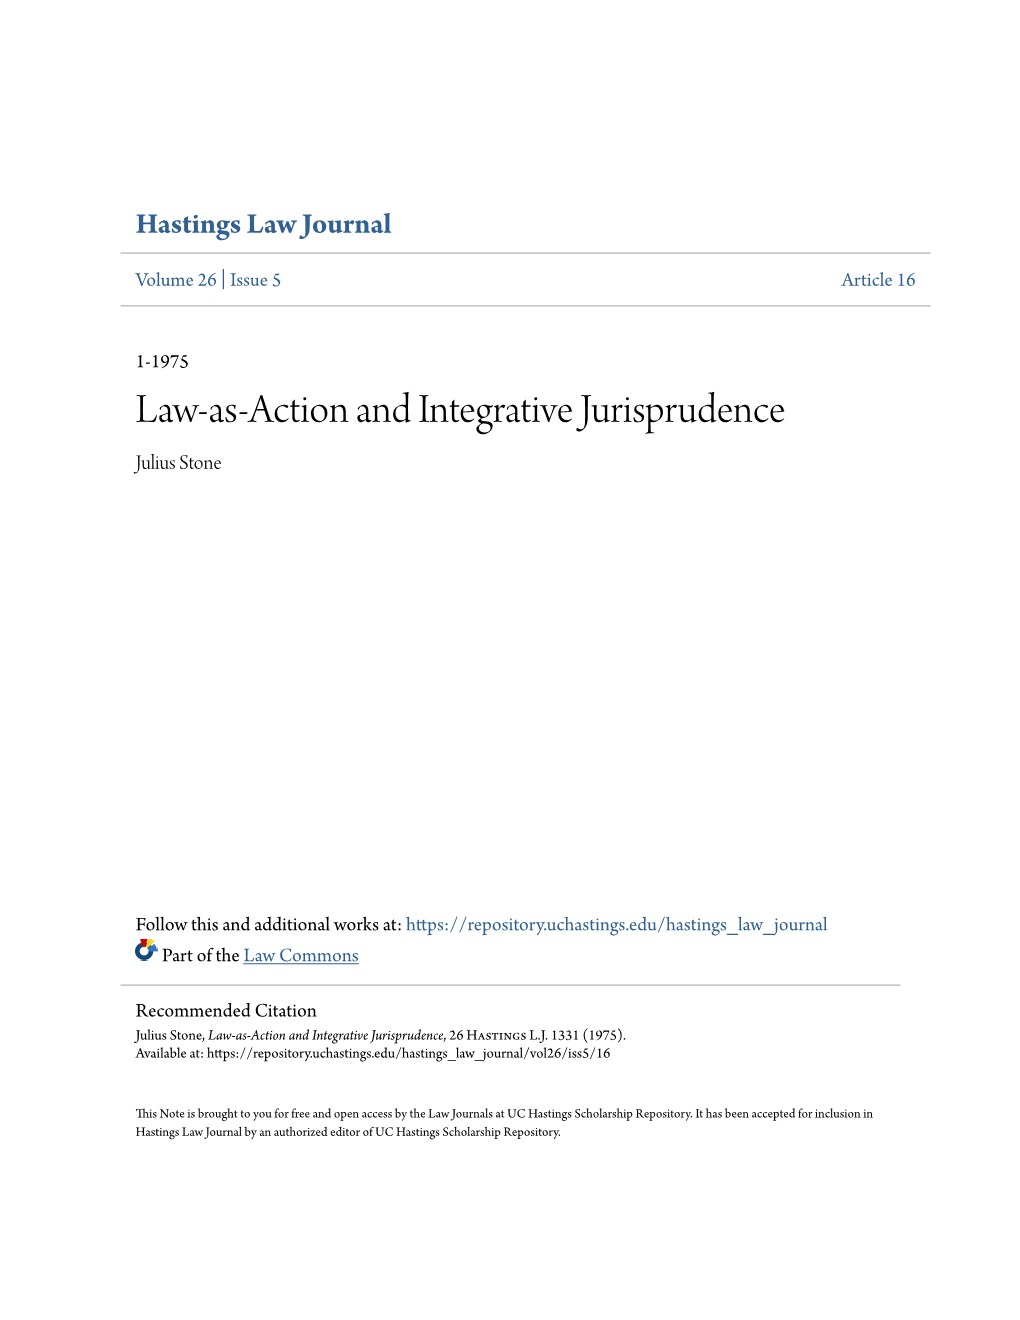 Law-As-Action and Integrative Jurisprudence Julius Stone